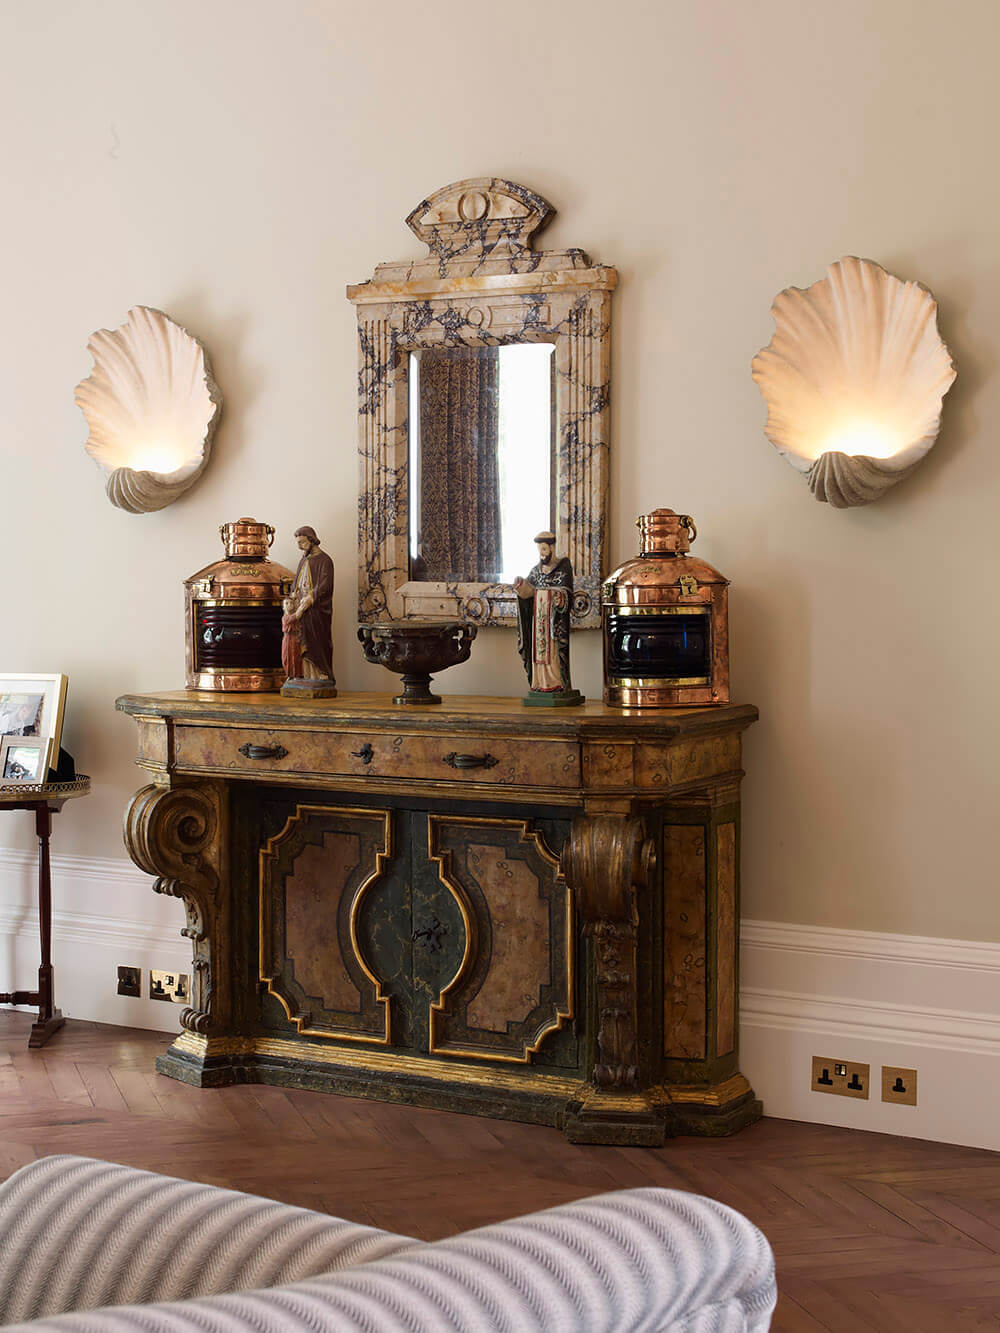 Luxury interior of Notting Hill house with shell-shaped lights and antique sideboard.